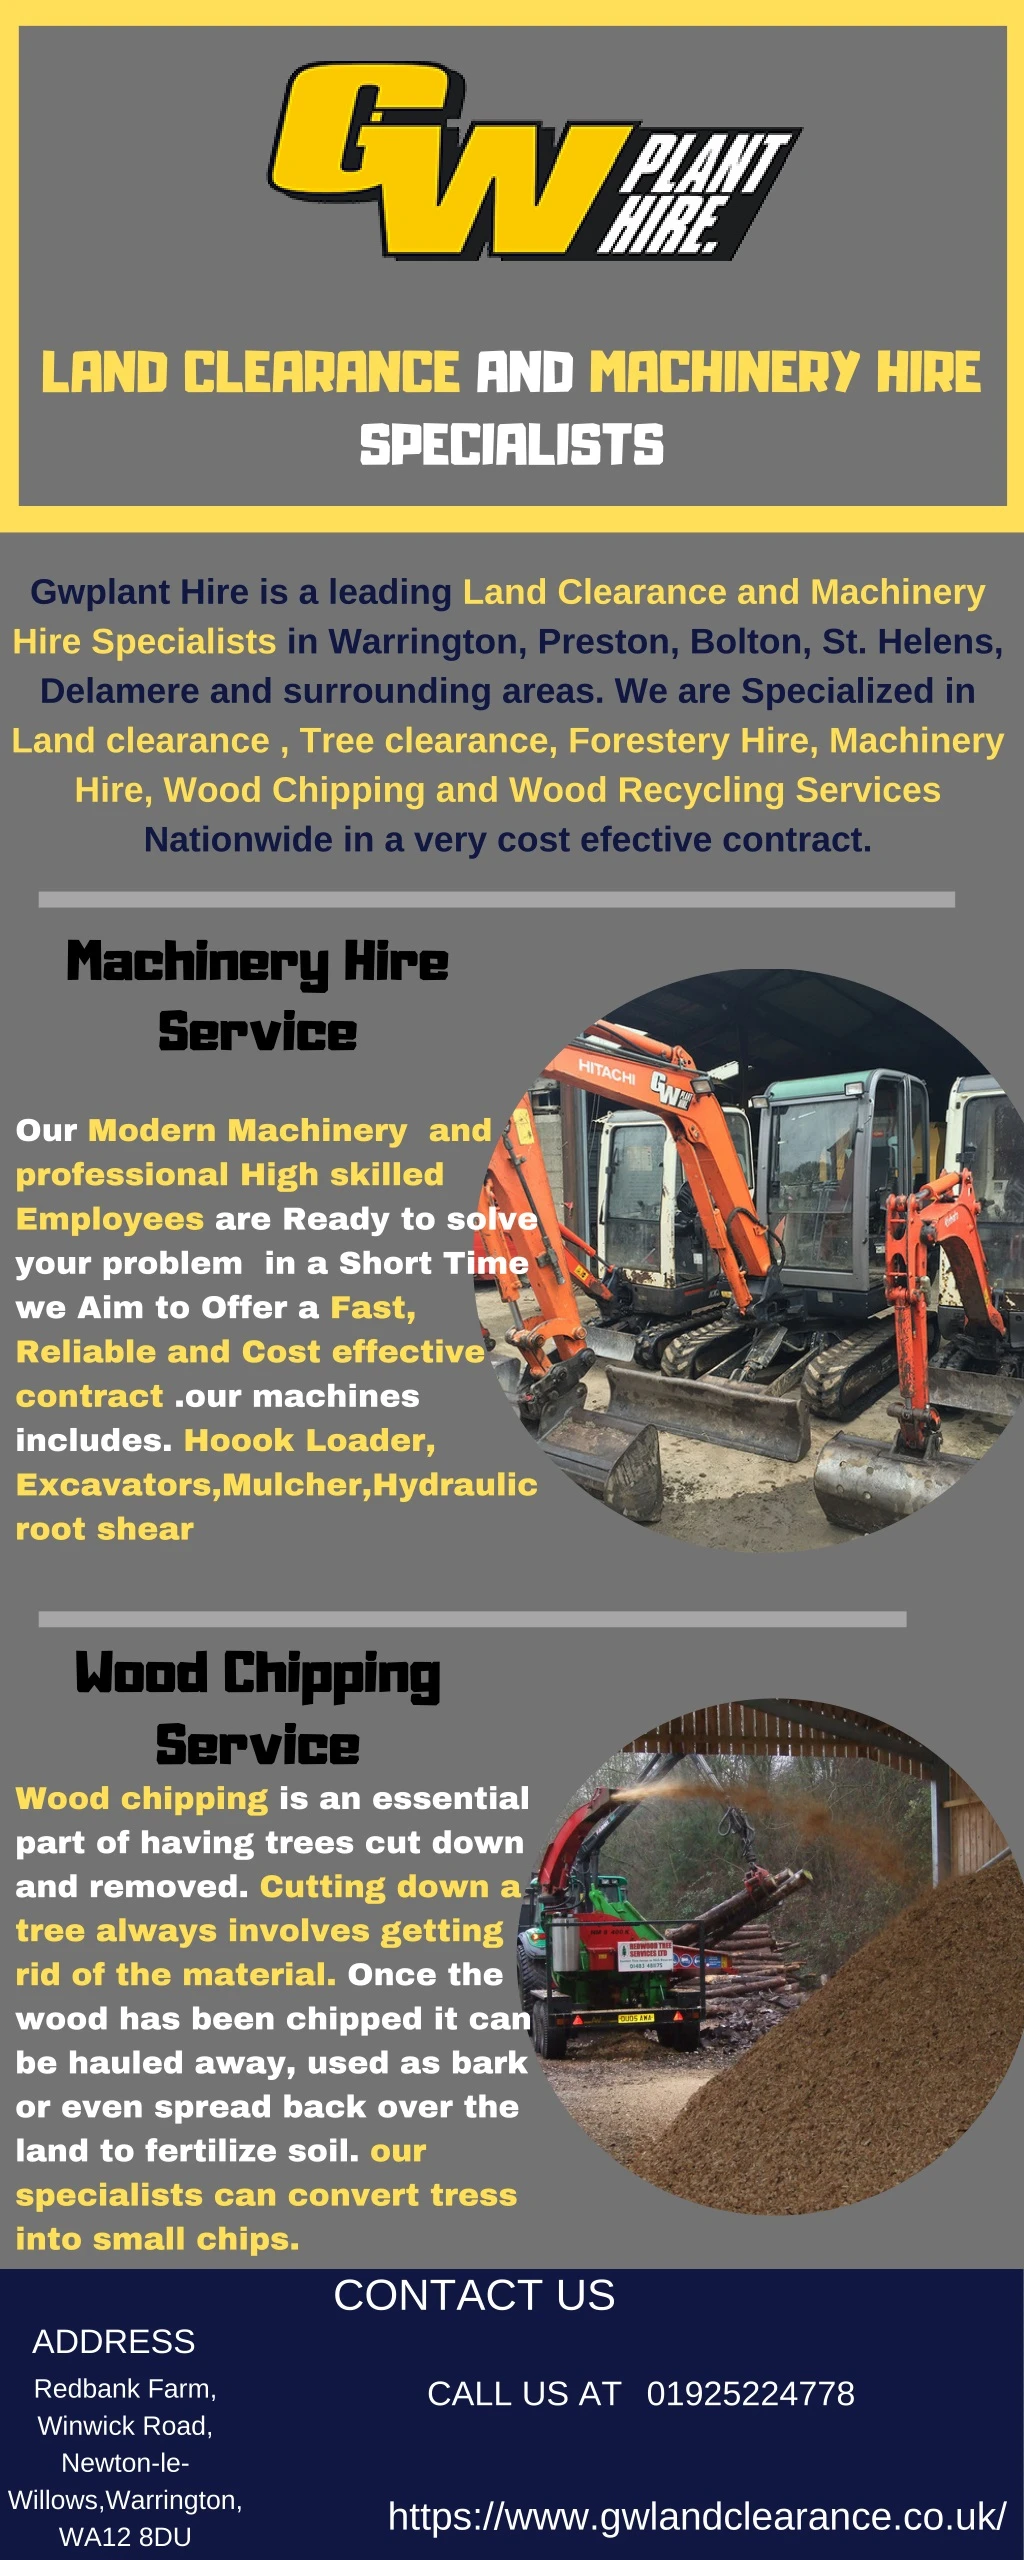 land clearance and machinery hire specialists